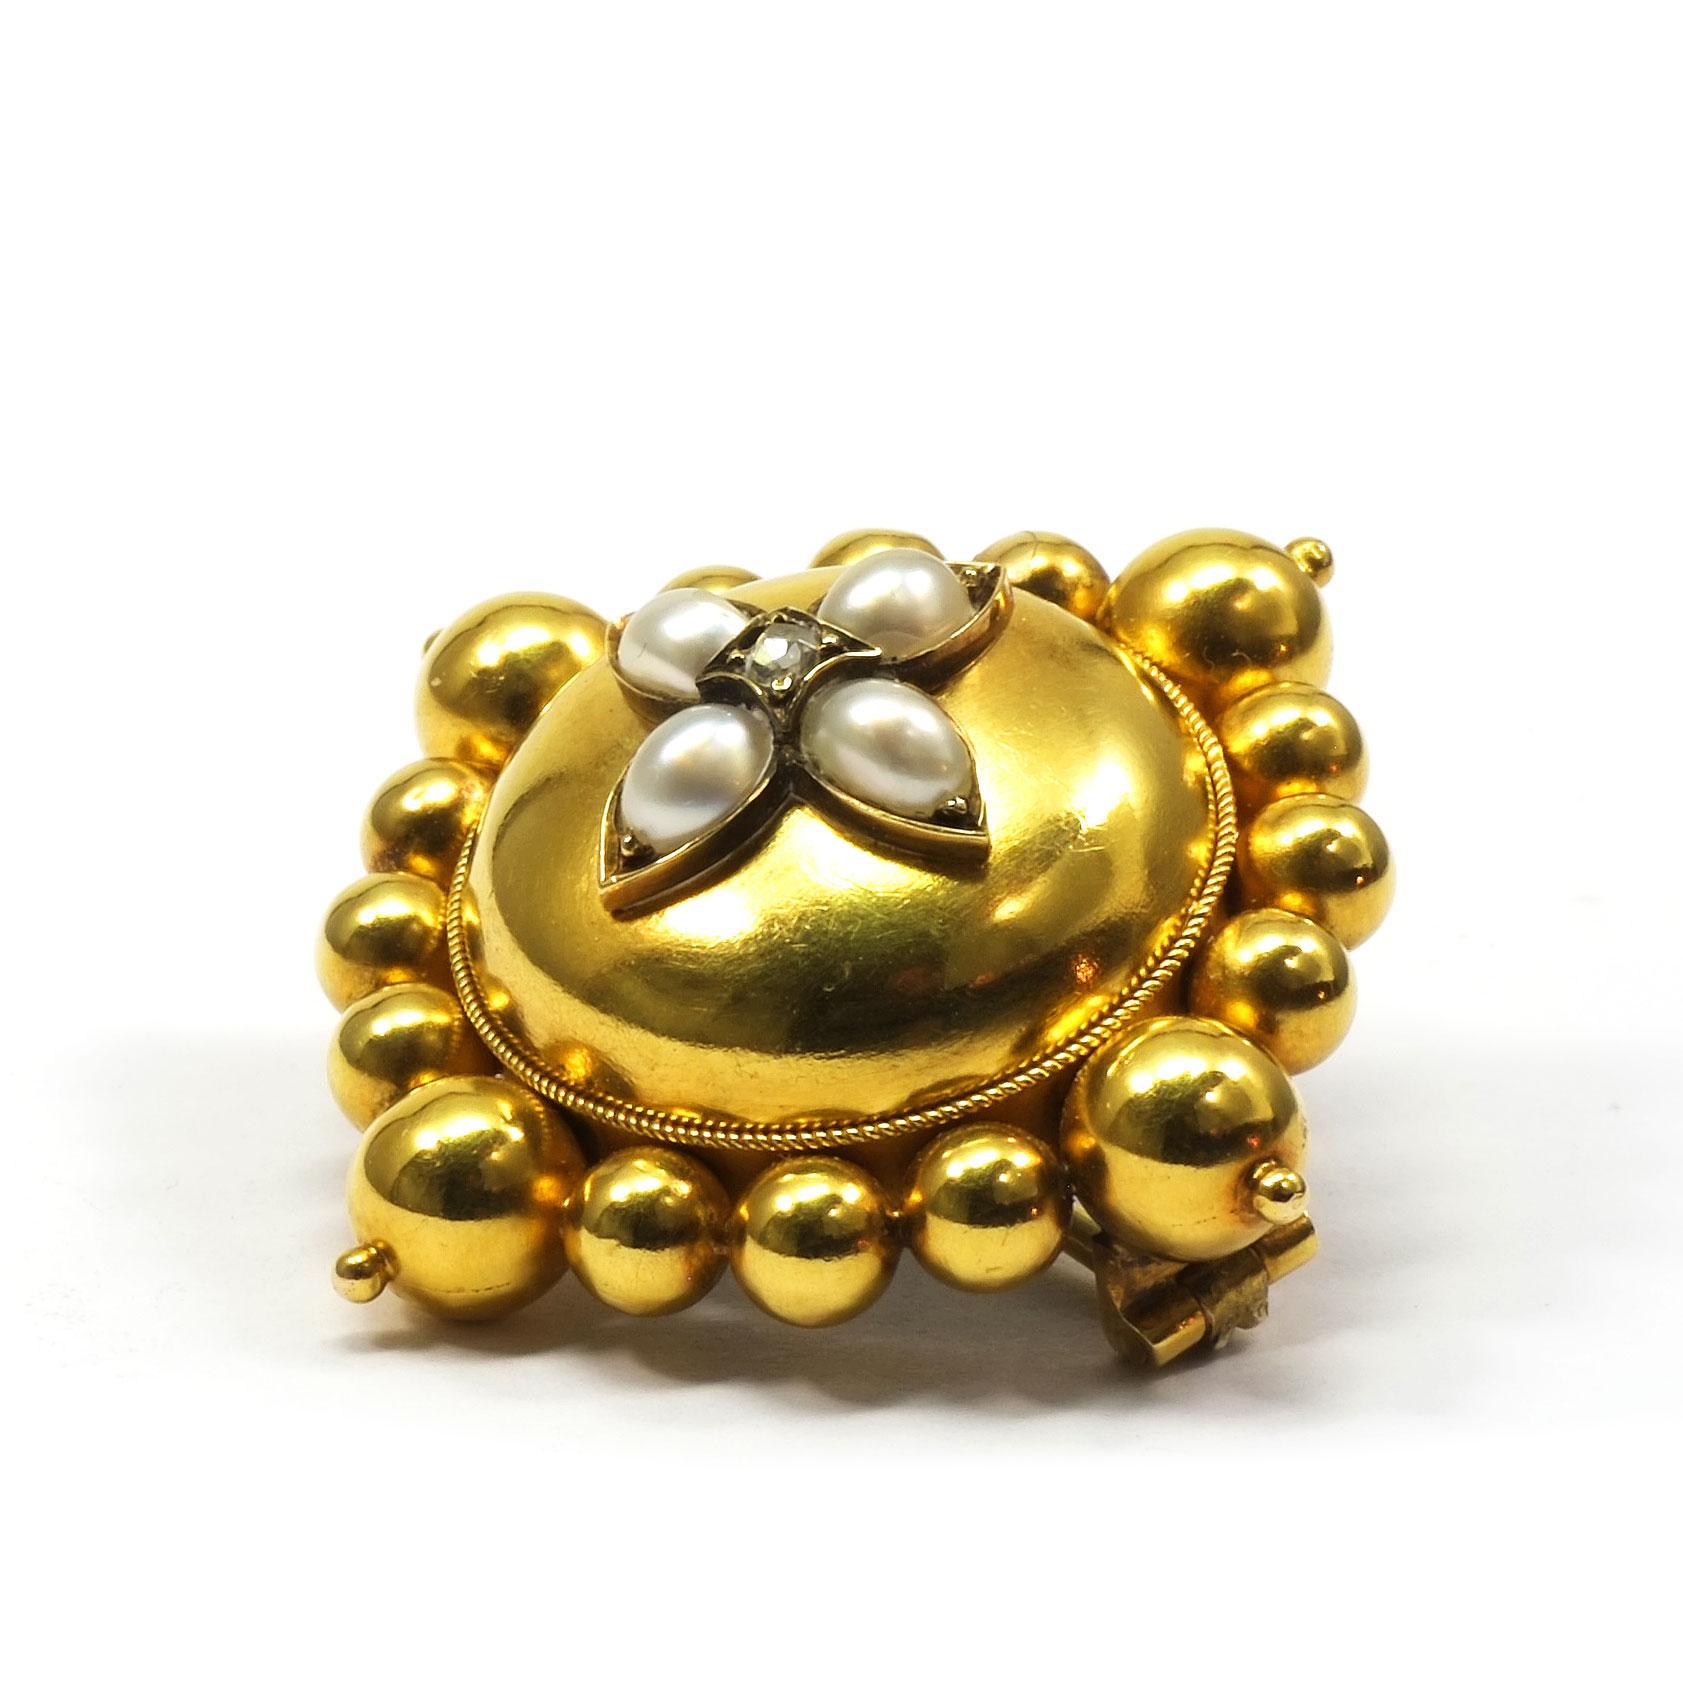 Early Victorian Victorian Pearl and Diamond 18K Gold Brooch, circa 1840